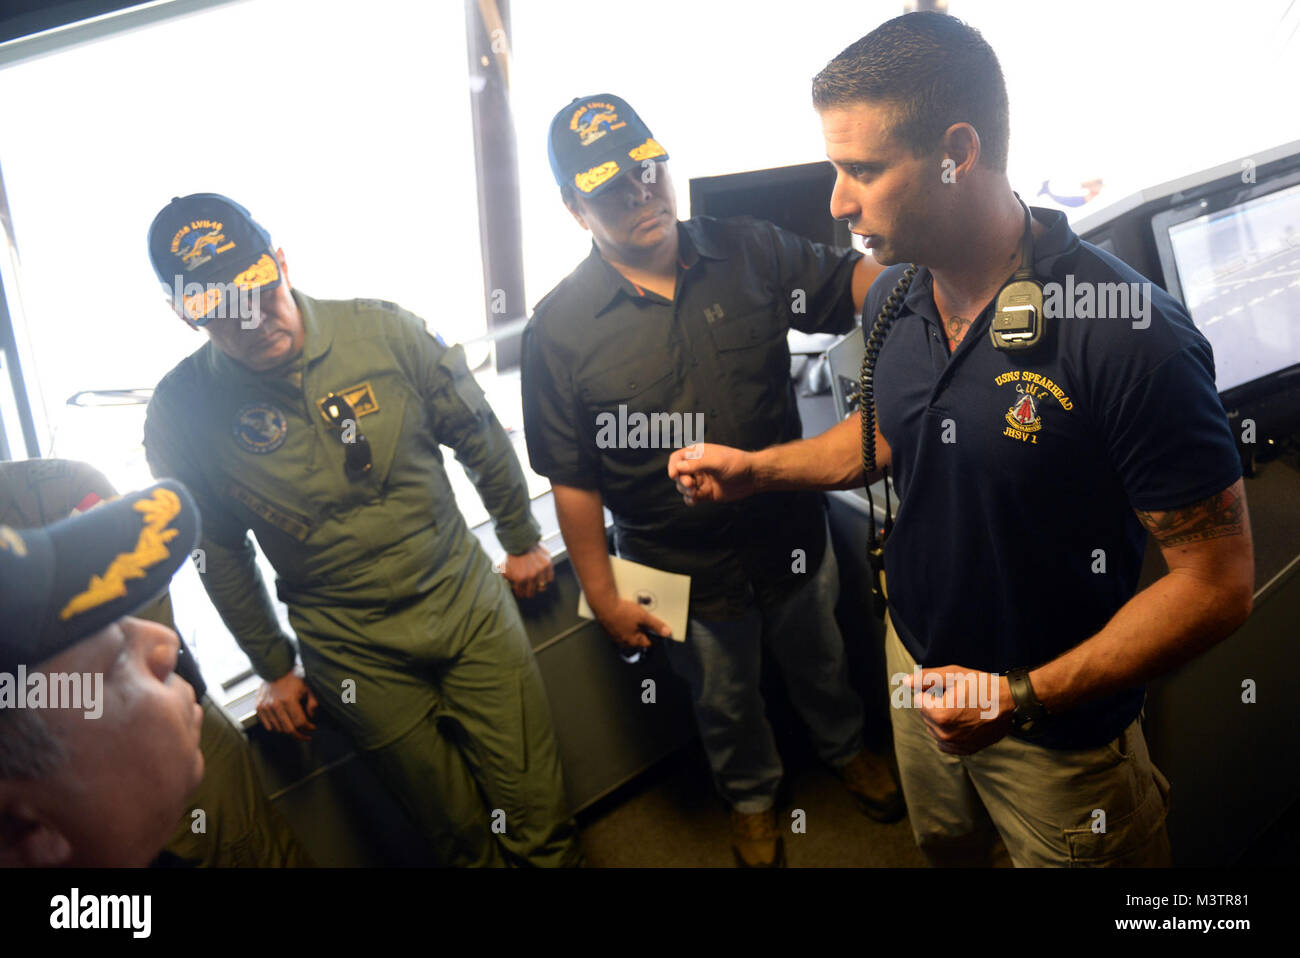 GULF OF PANAMA (Sept. 24, 2016) - USNS Spearhead (T-EPF 1) Chief Mate Adam Steeper gives a tour of the ship to Belsio González Director General Servicio Nacional Aeronaval, Alexis Bethancourt Yau, Panama Minister of Security and other guests during UNITAS 2016. UNITAS is an annual multi-national exercise that focuses on strengthening our existing regional partnerships and encourages establishing new relationships through the exchange of maritime mission-focused knowledge and expertise throughout the exercise. (U.S. Navy Photo by Mass Communication Specialist 1st Class Jacob Sippel/RELEASED) 16 Stock Photo